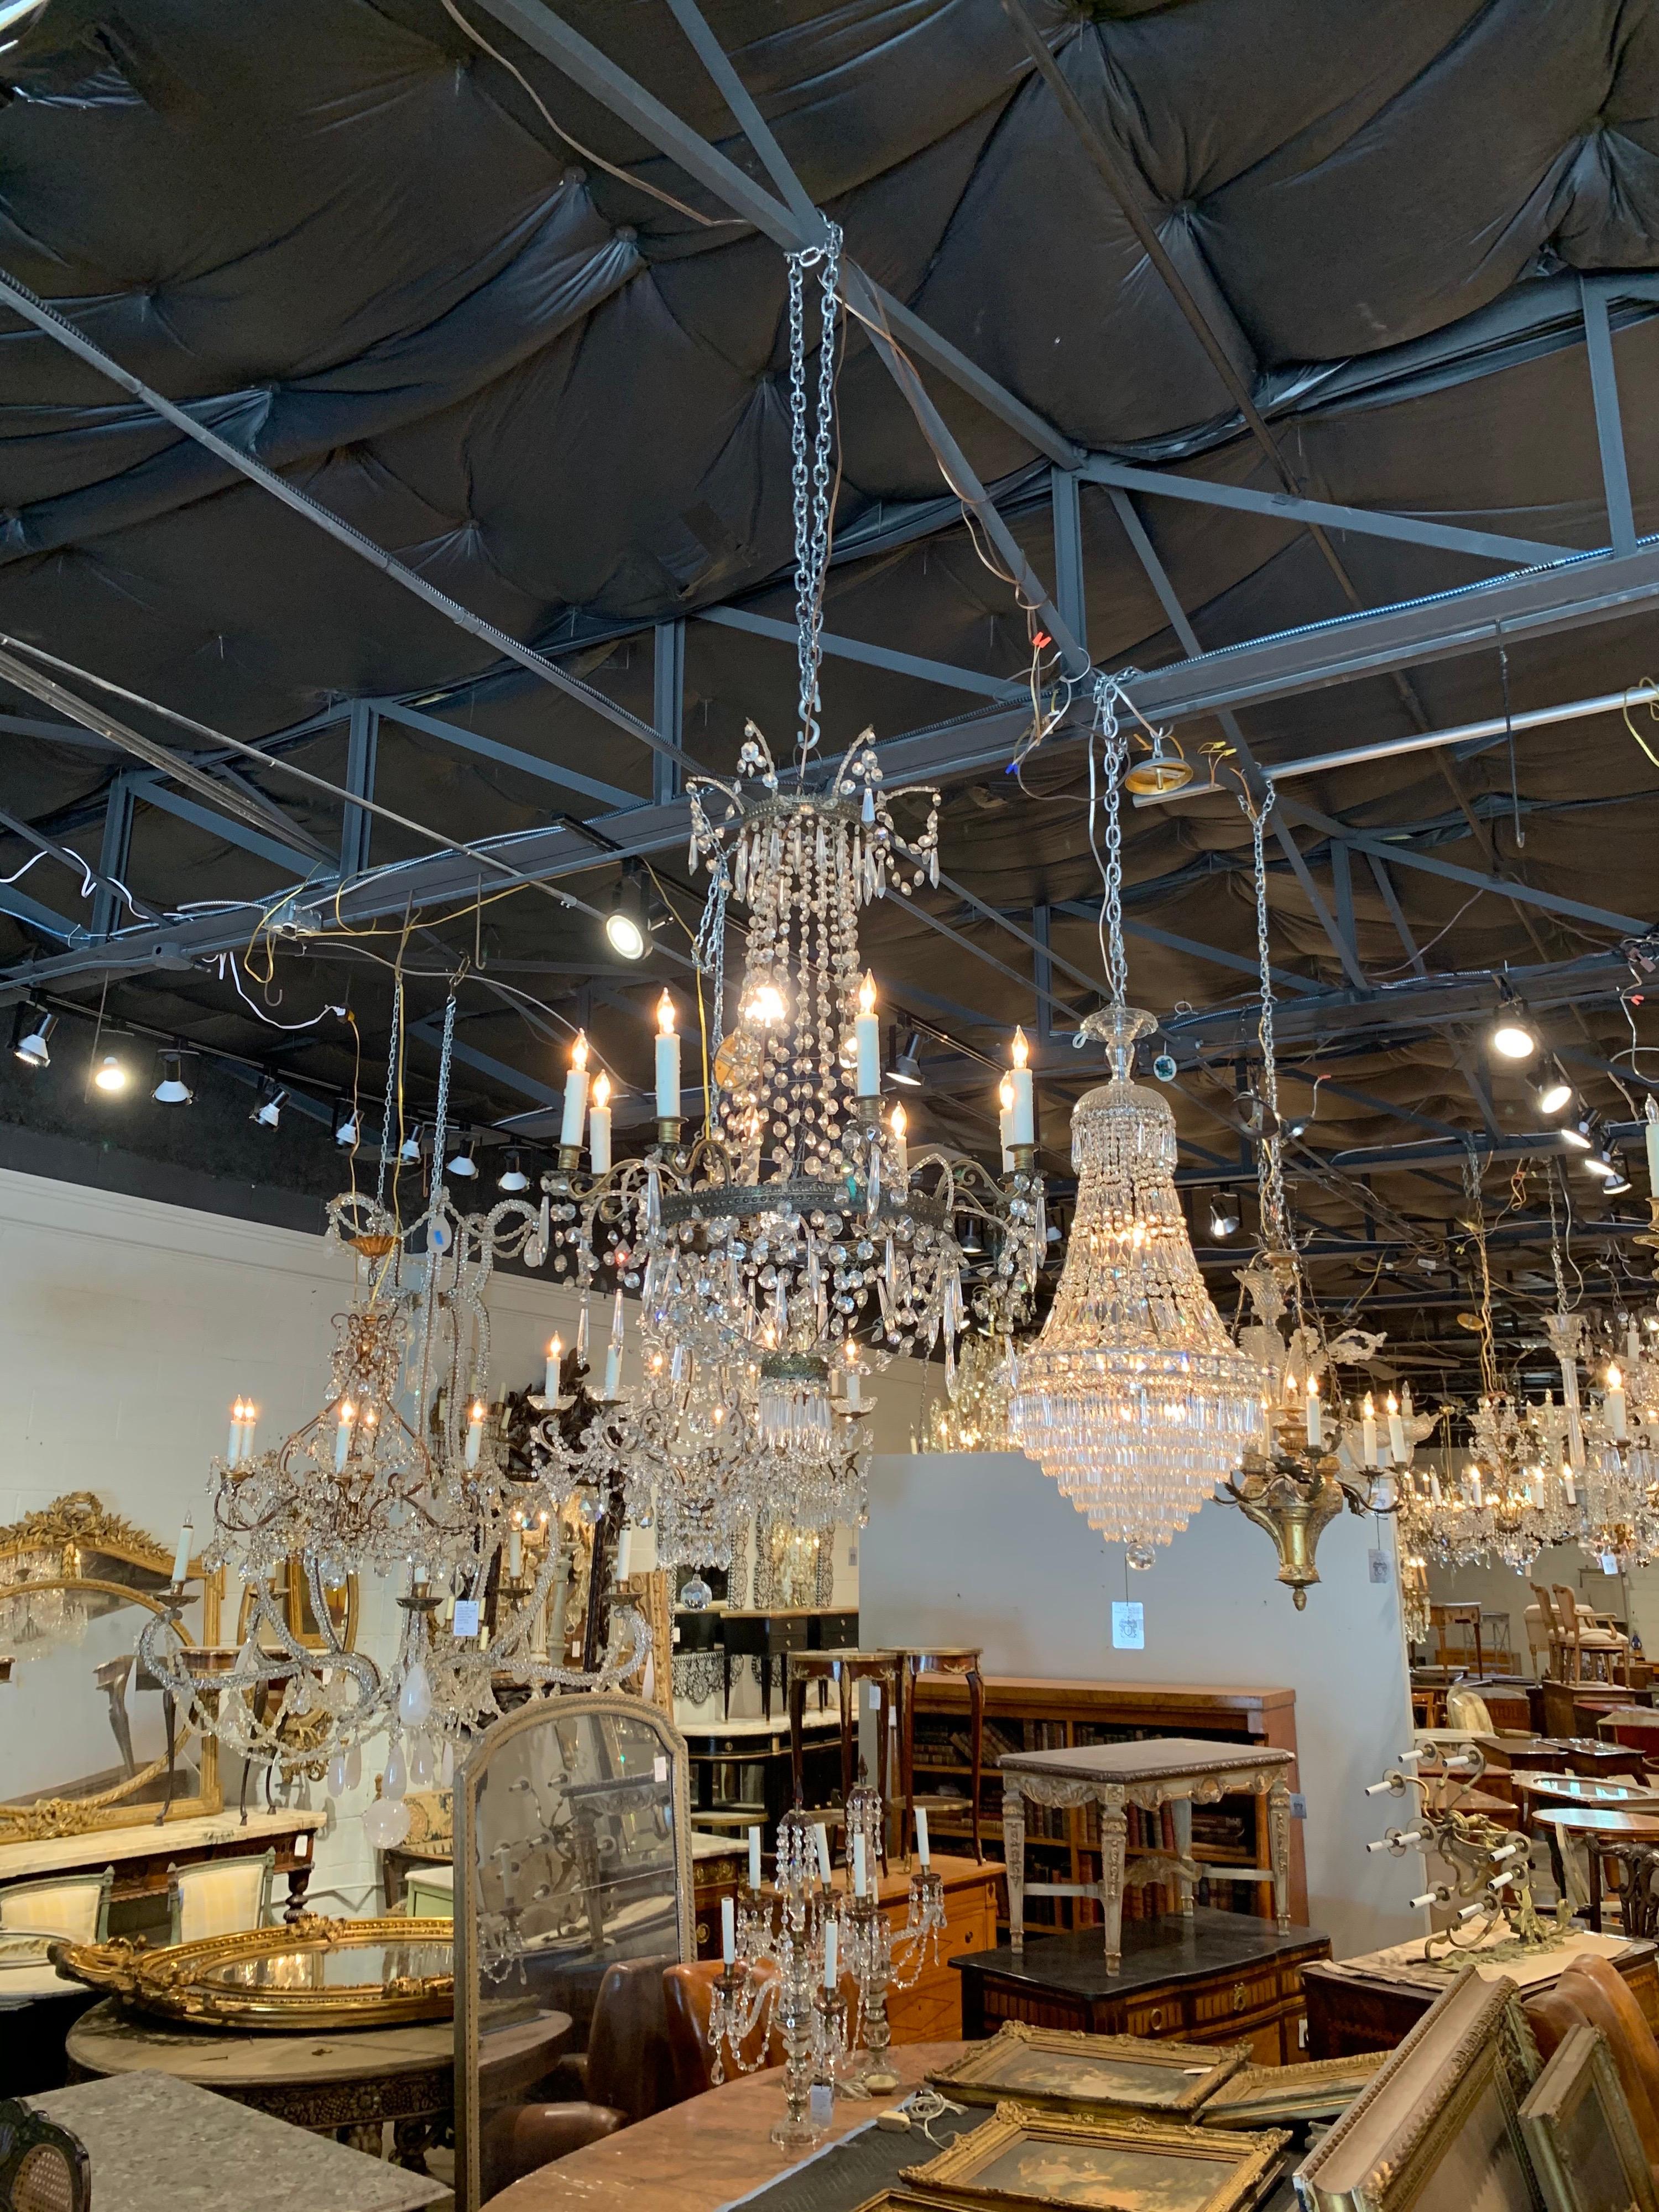 Exquisite 19th century French Empire beaded crystal and gilt bronze chandelier. Beautiful crystals and basket shape along with 8 lights. So lovely!